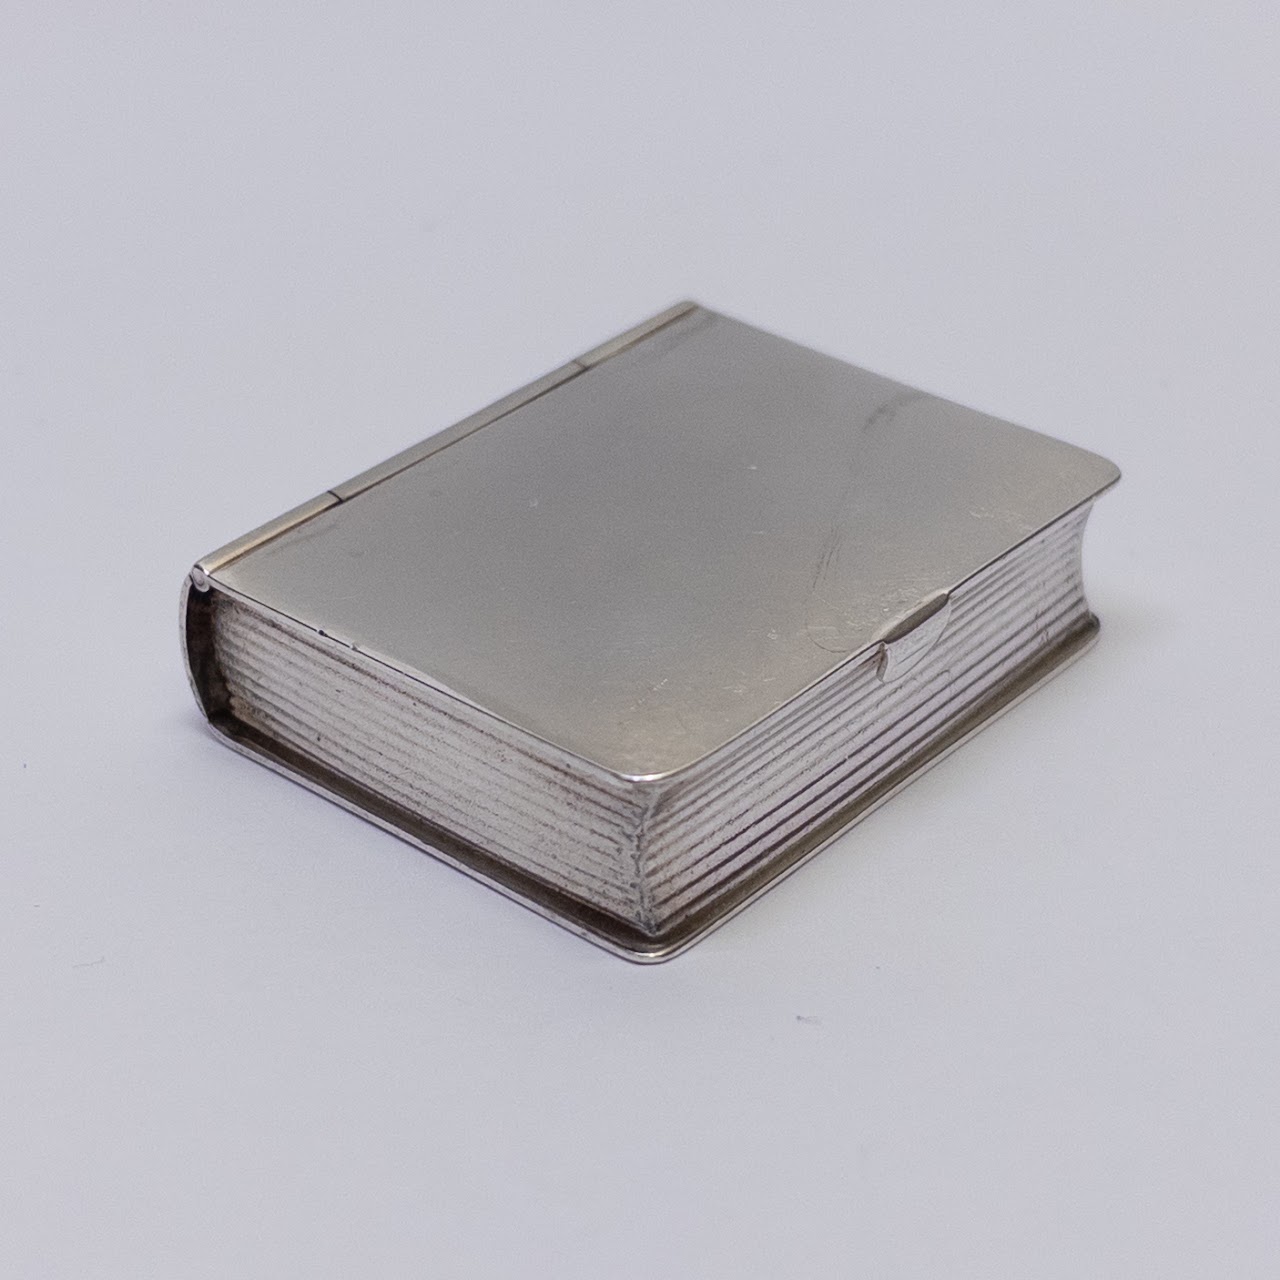 Tiffany & Co. Sterling Silver Book Shaped Pillbox